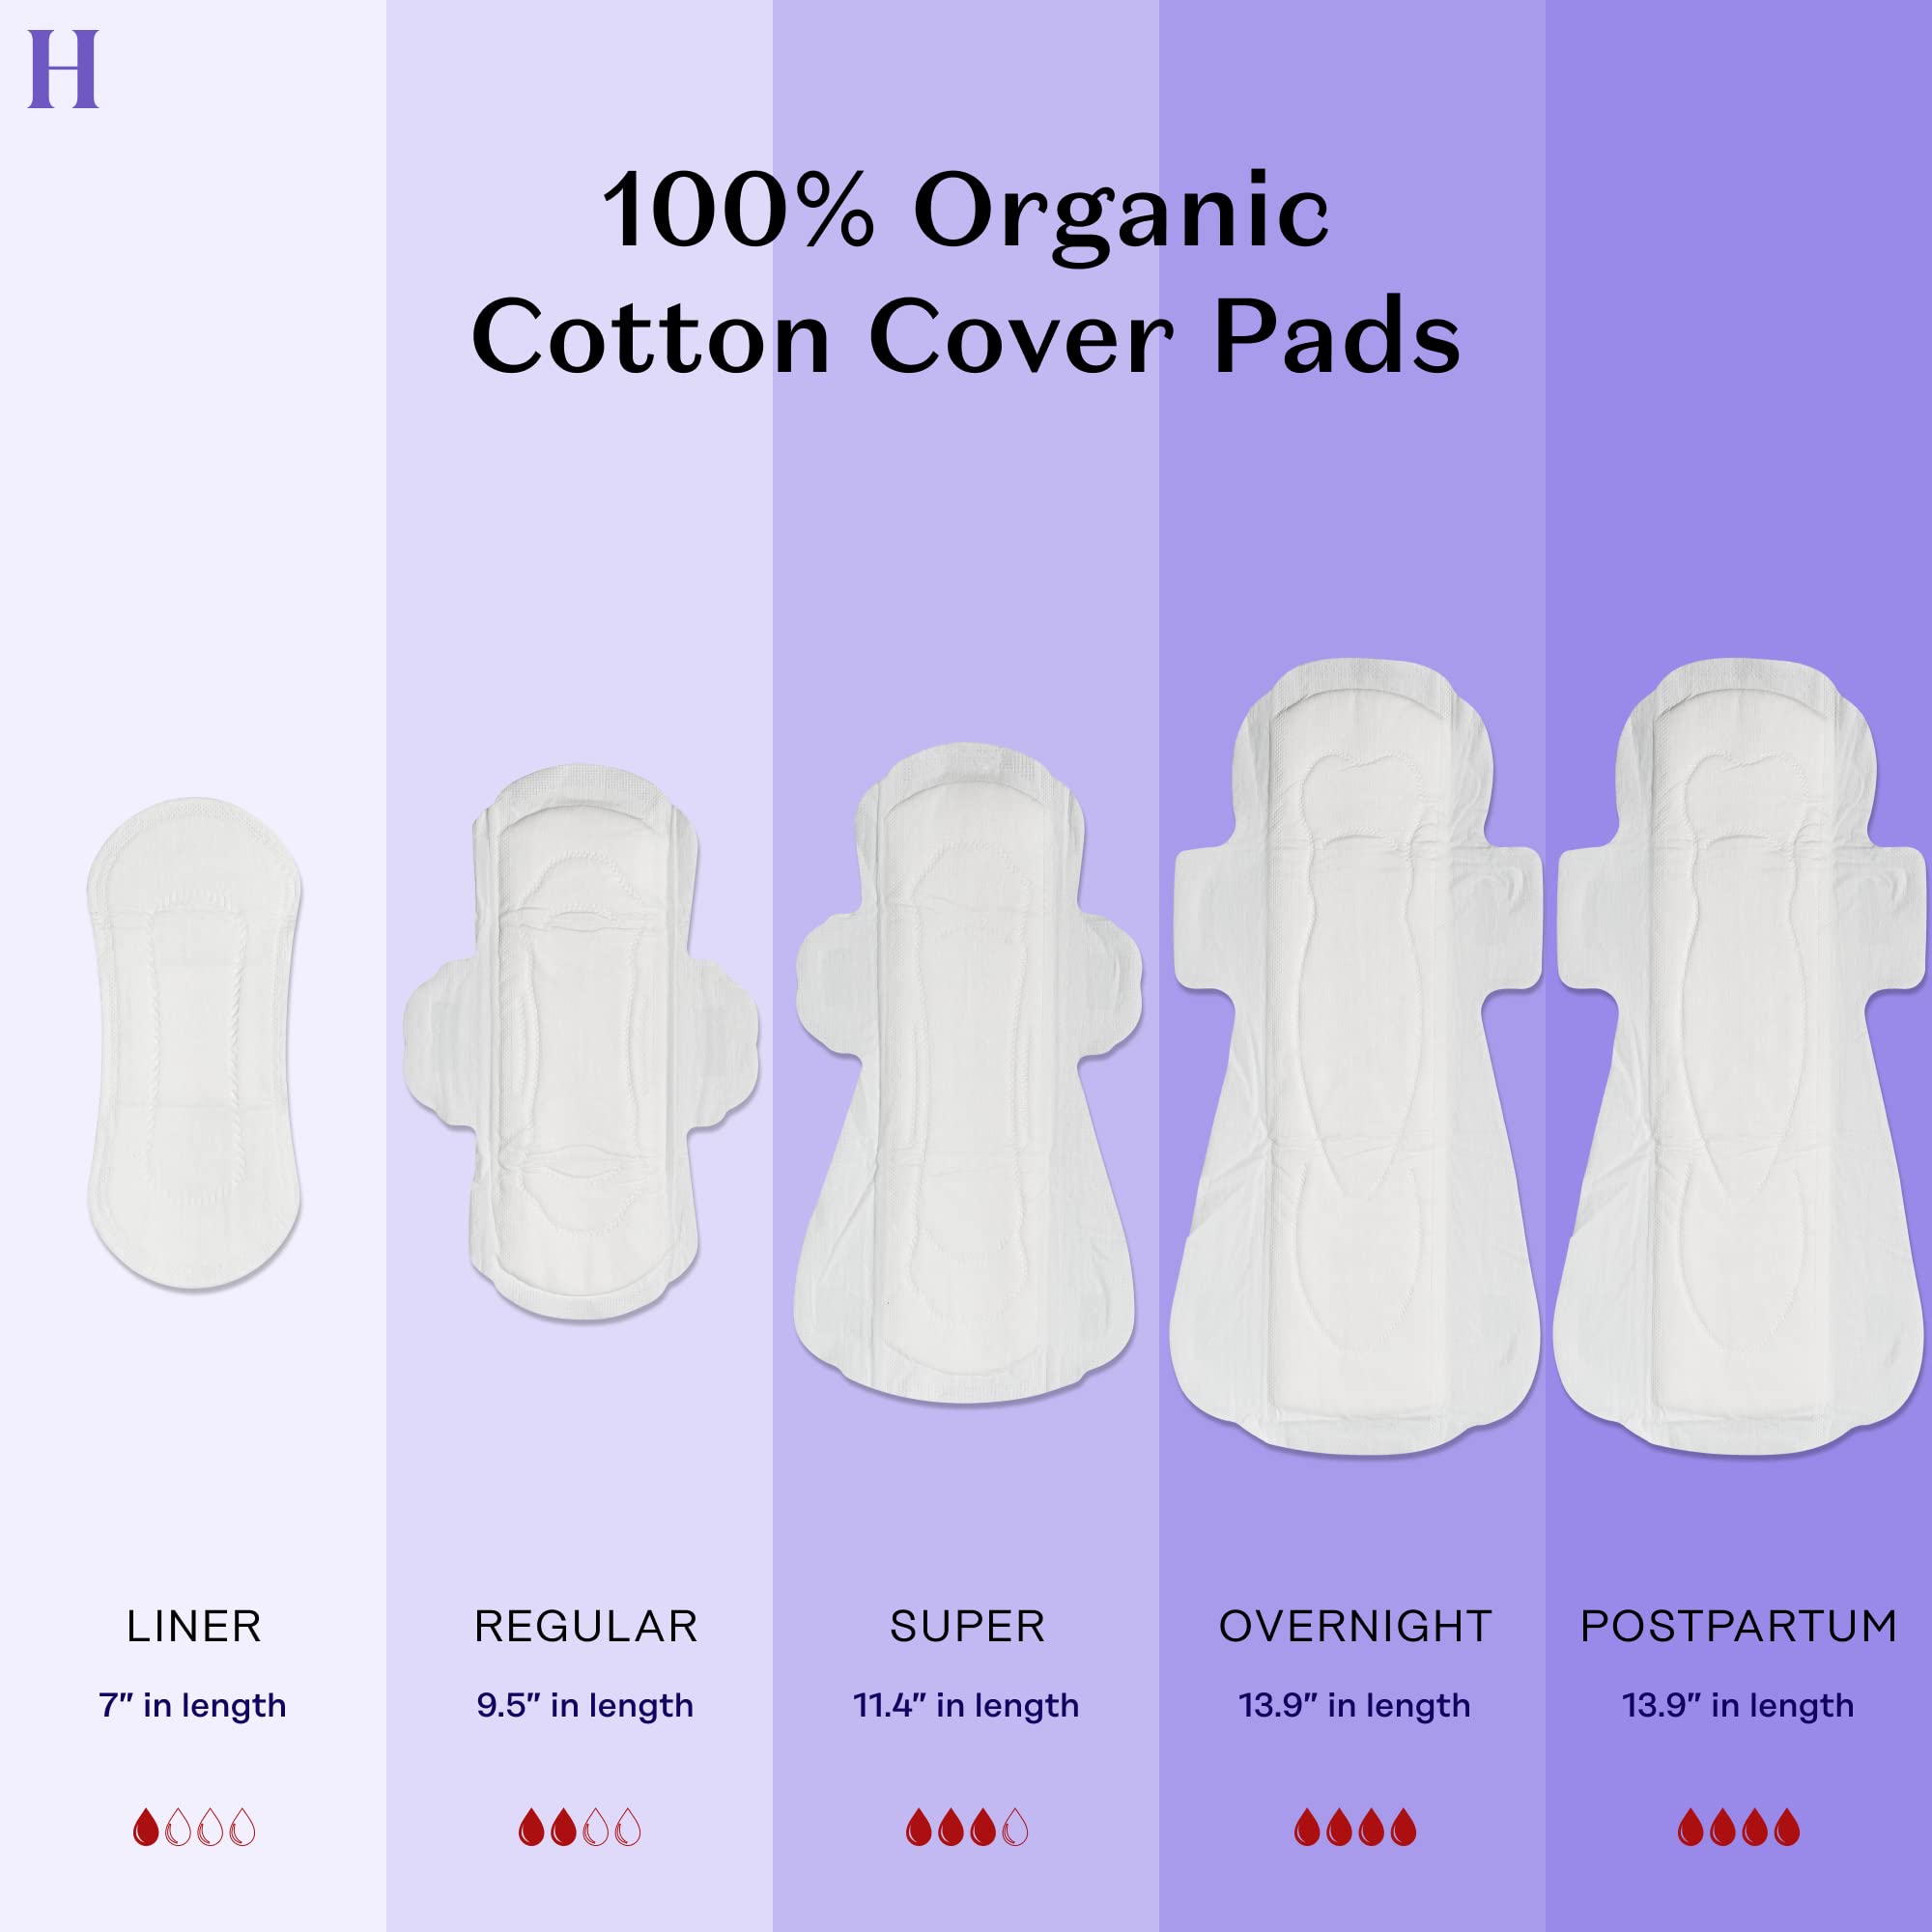 The Honey Pot Company - Regular Flow Pads with Wings - Organic Pads for Women - Herbal Infused w/Essential Oils for Cooling Effect, Cotton Cover, & Ultra-Absorbent Pulp Core - Feminine Care - 20 ct